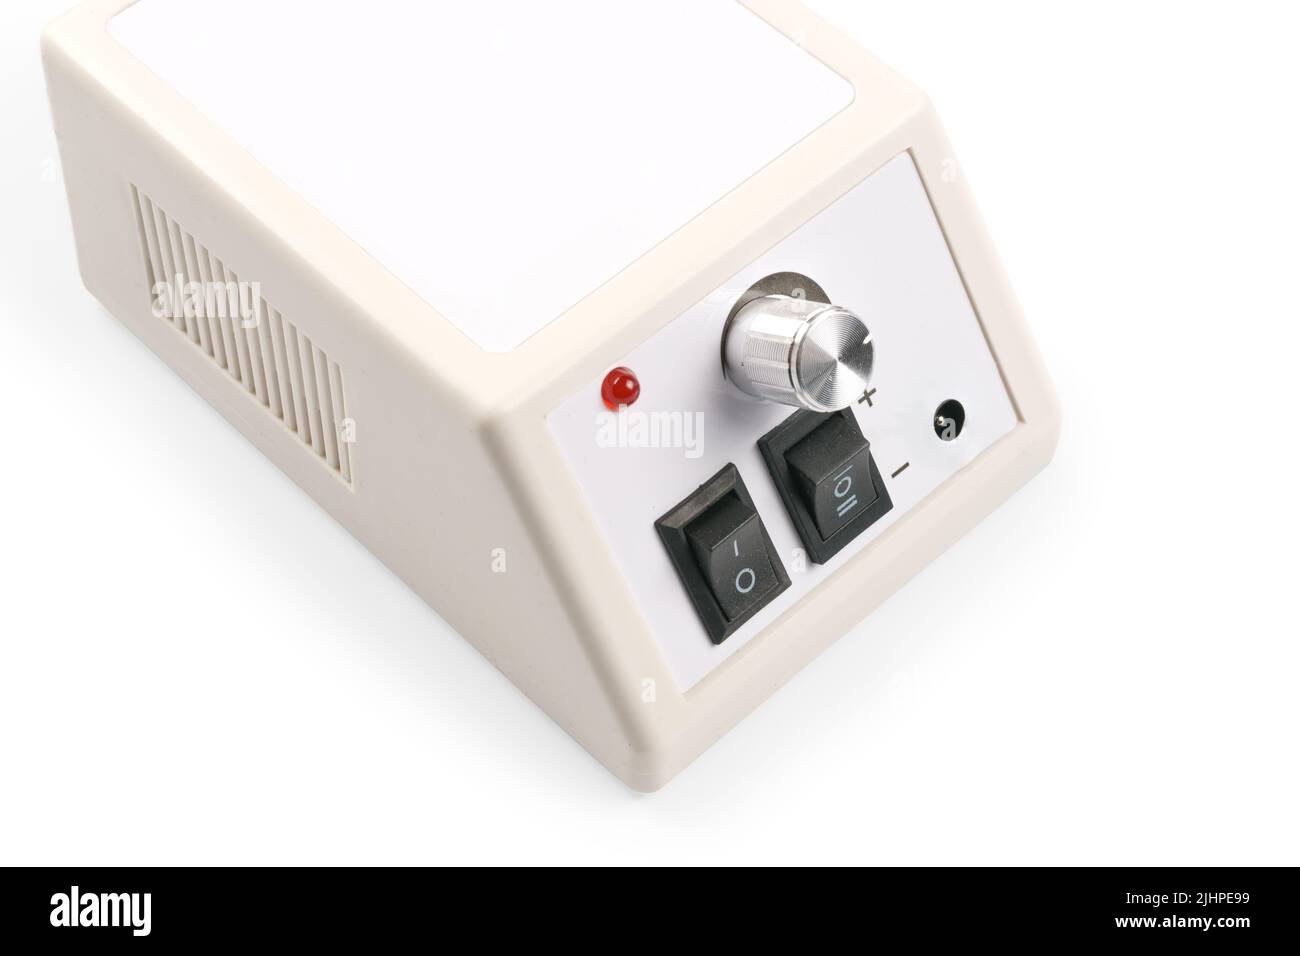 White electrical instrument with switches and indicators. Isolated on white, clipping path included Stock Photo